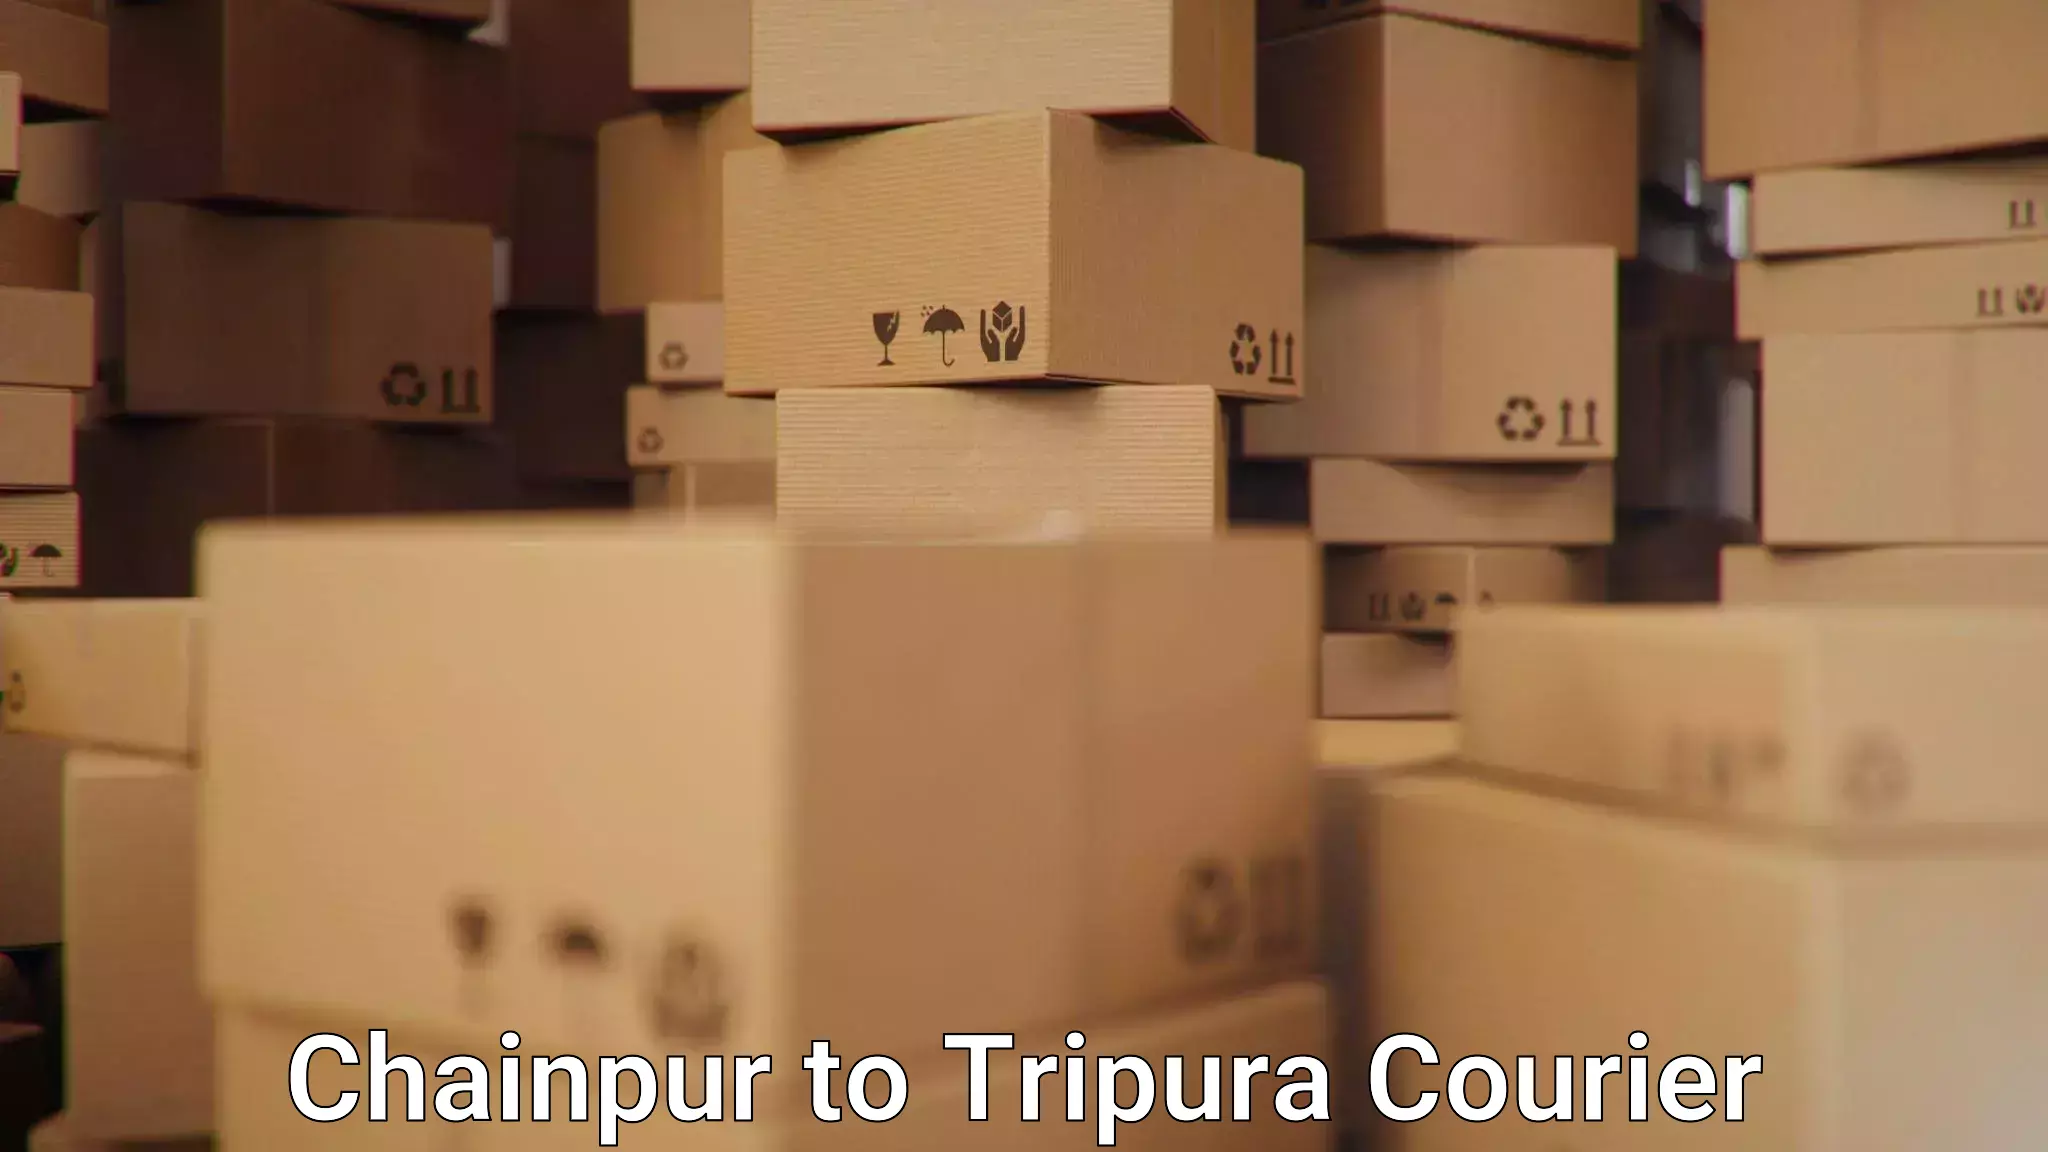 Courier app in Chainpur to Tripura